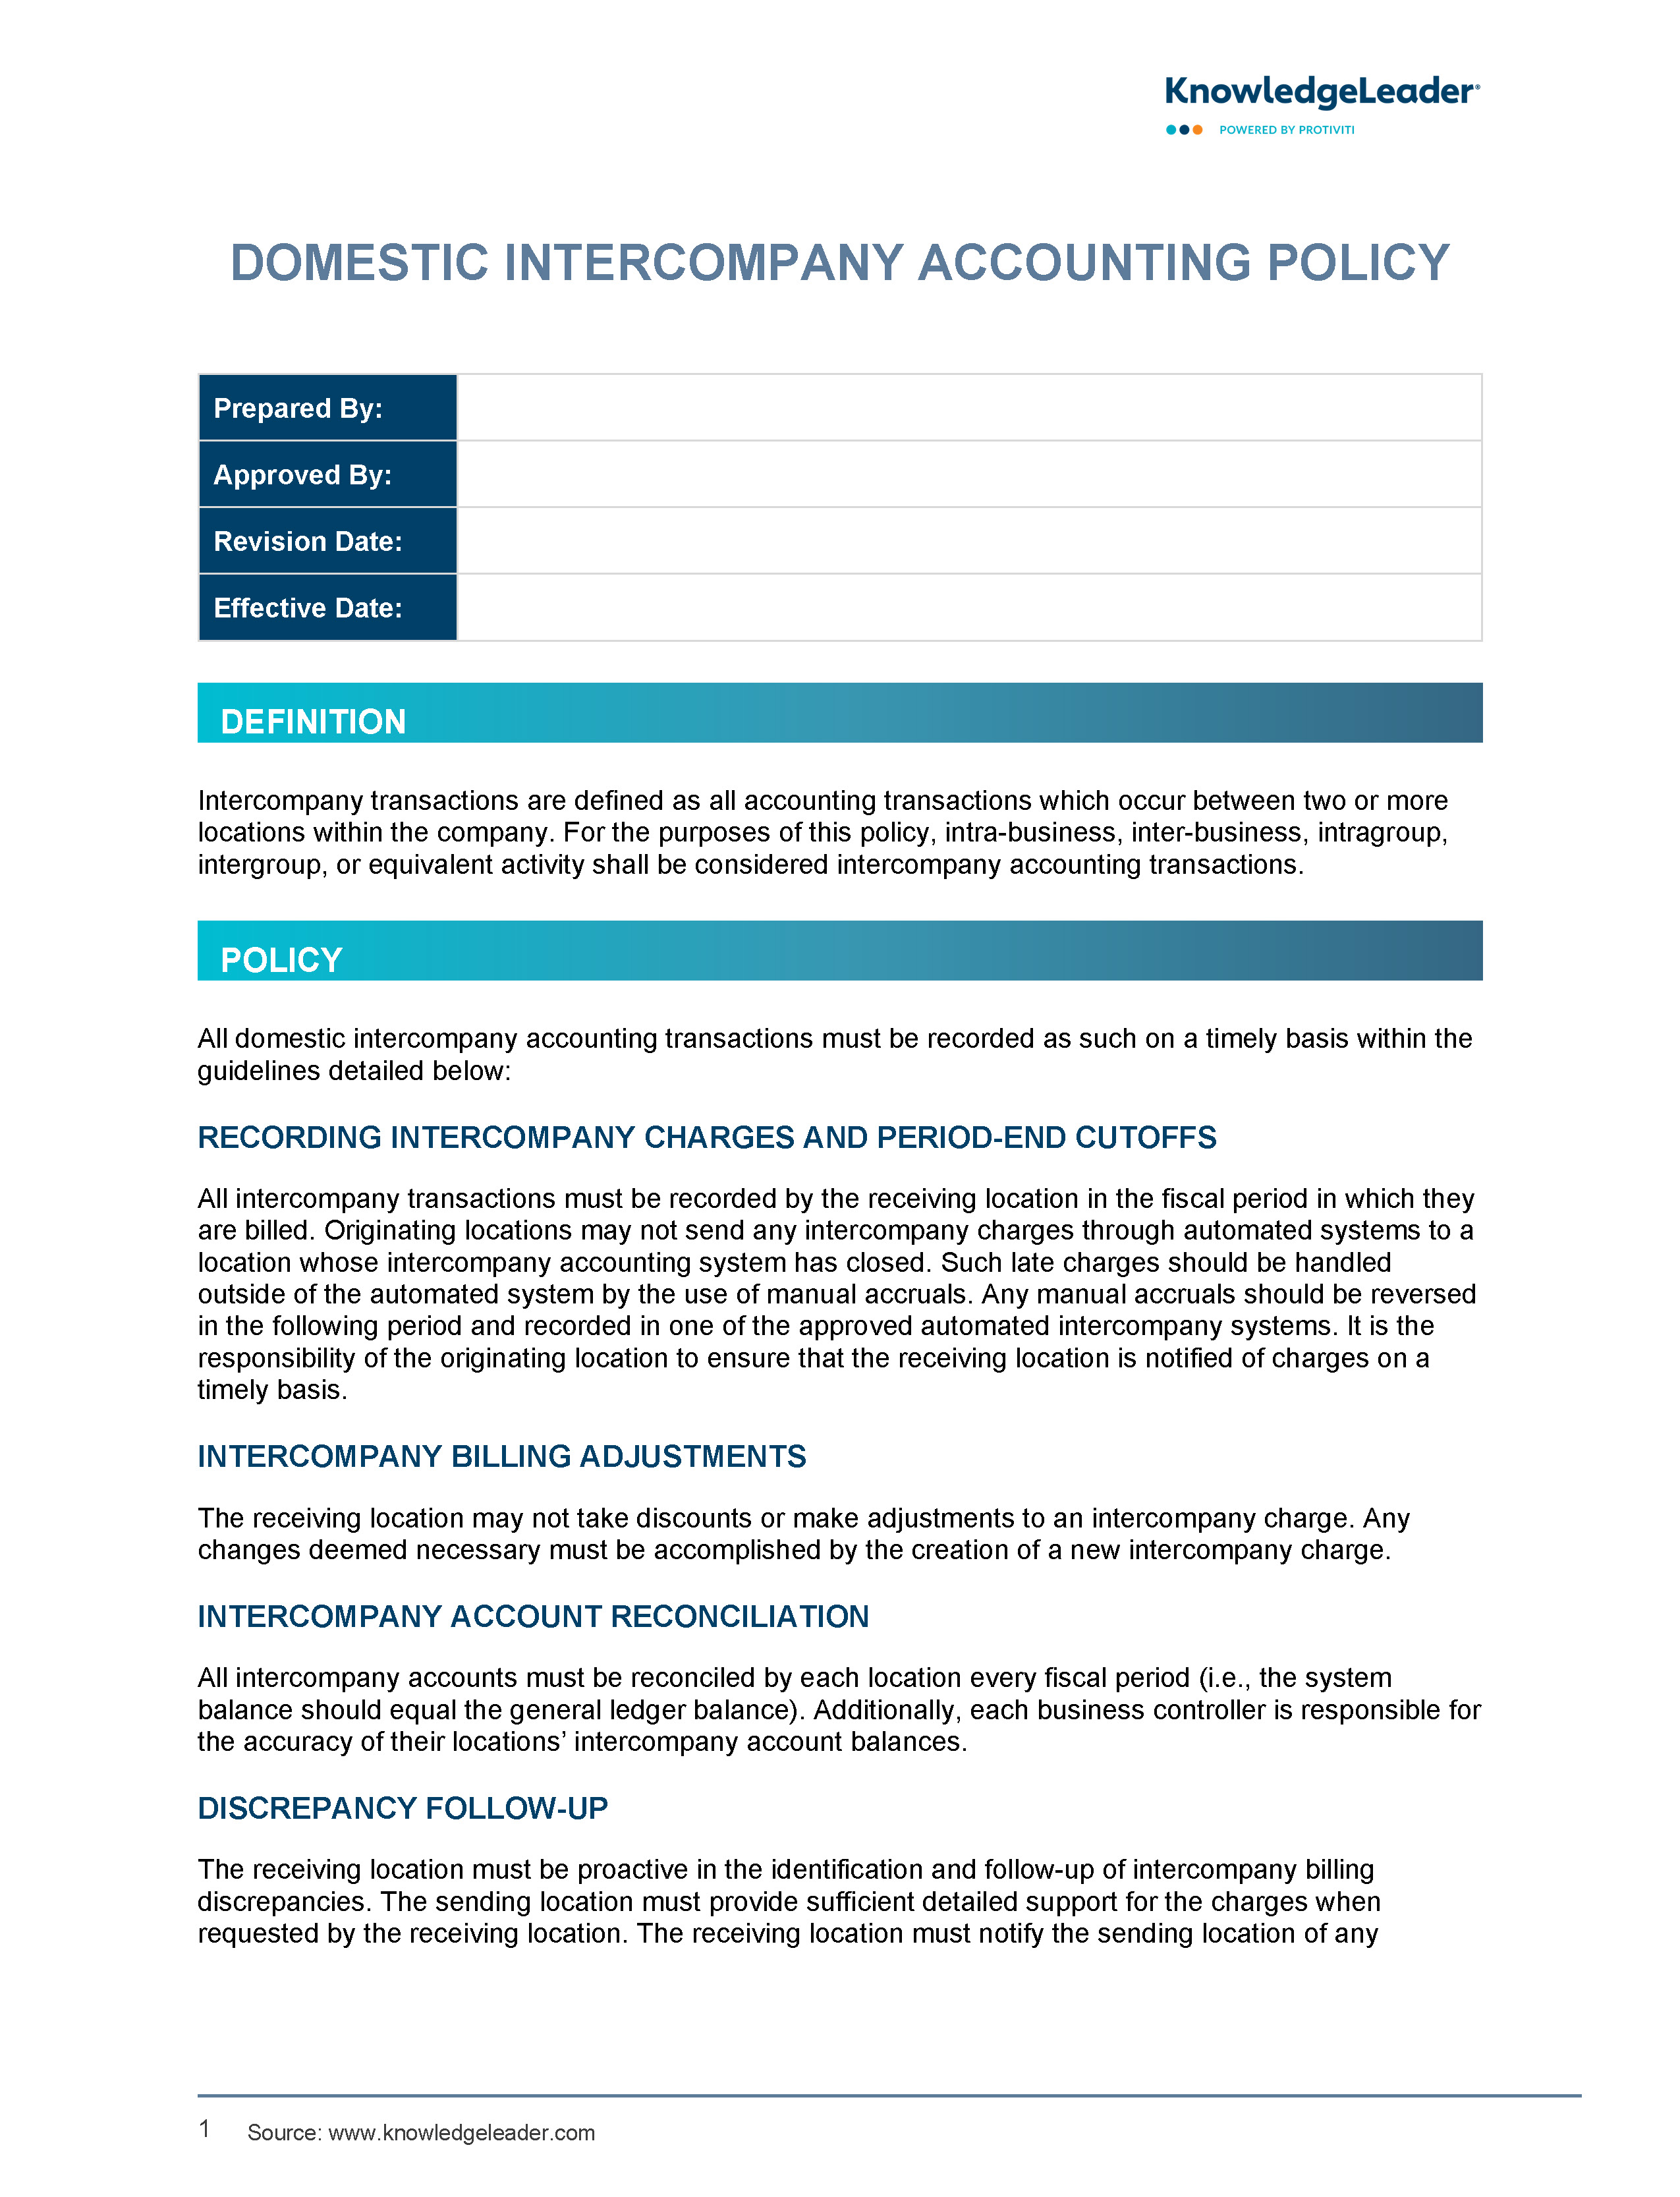 Screenshot of the first page of Domestic Intercompany Accounting Policy